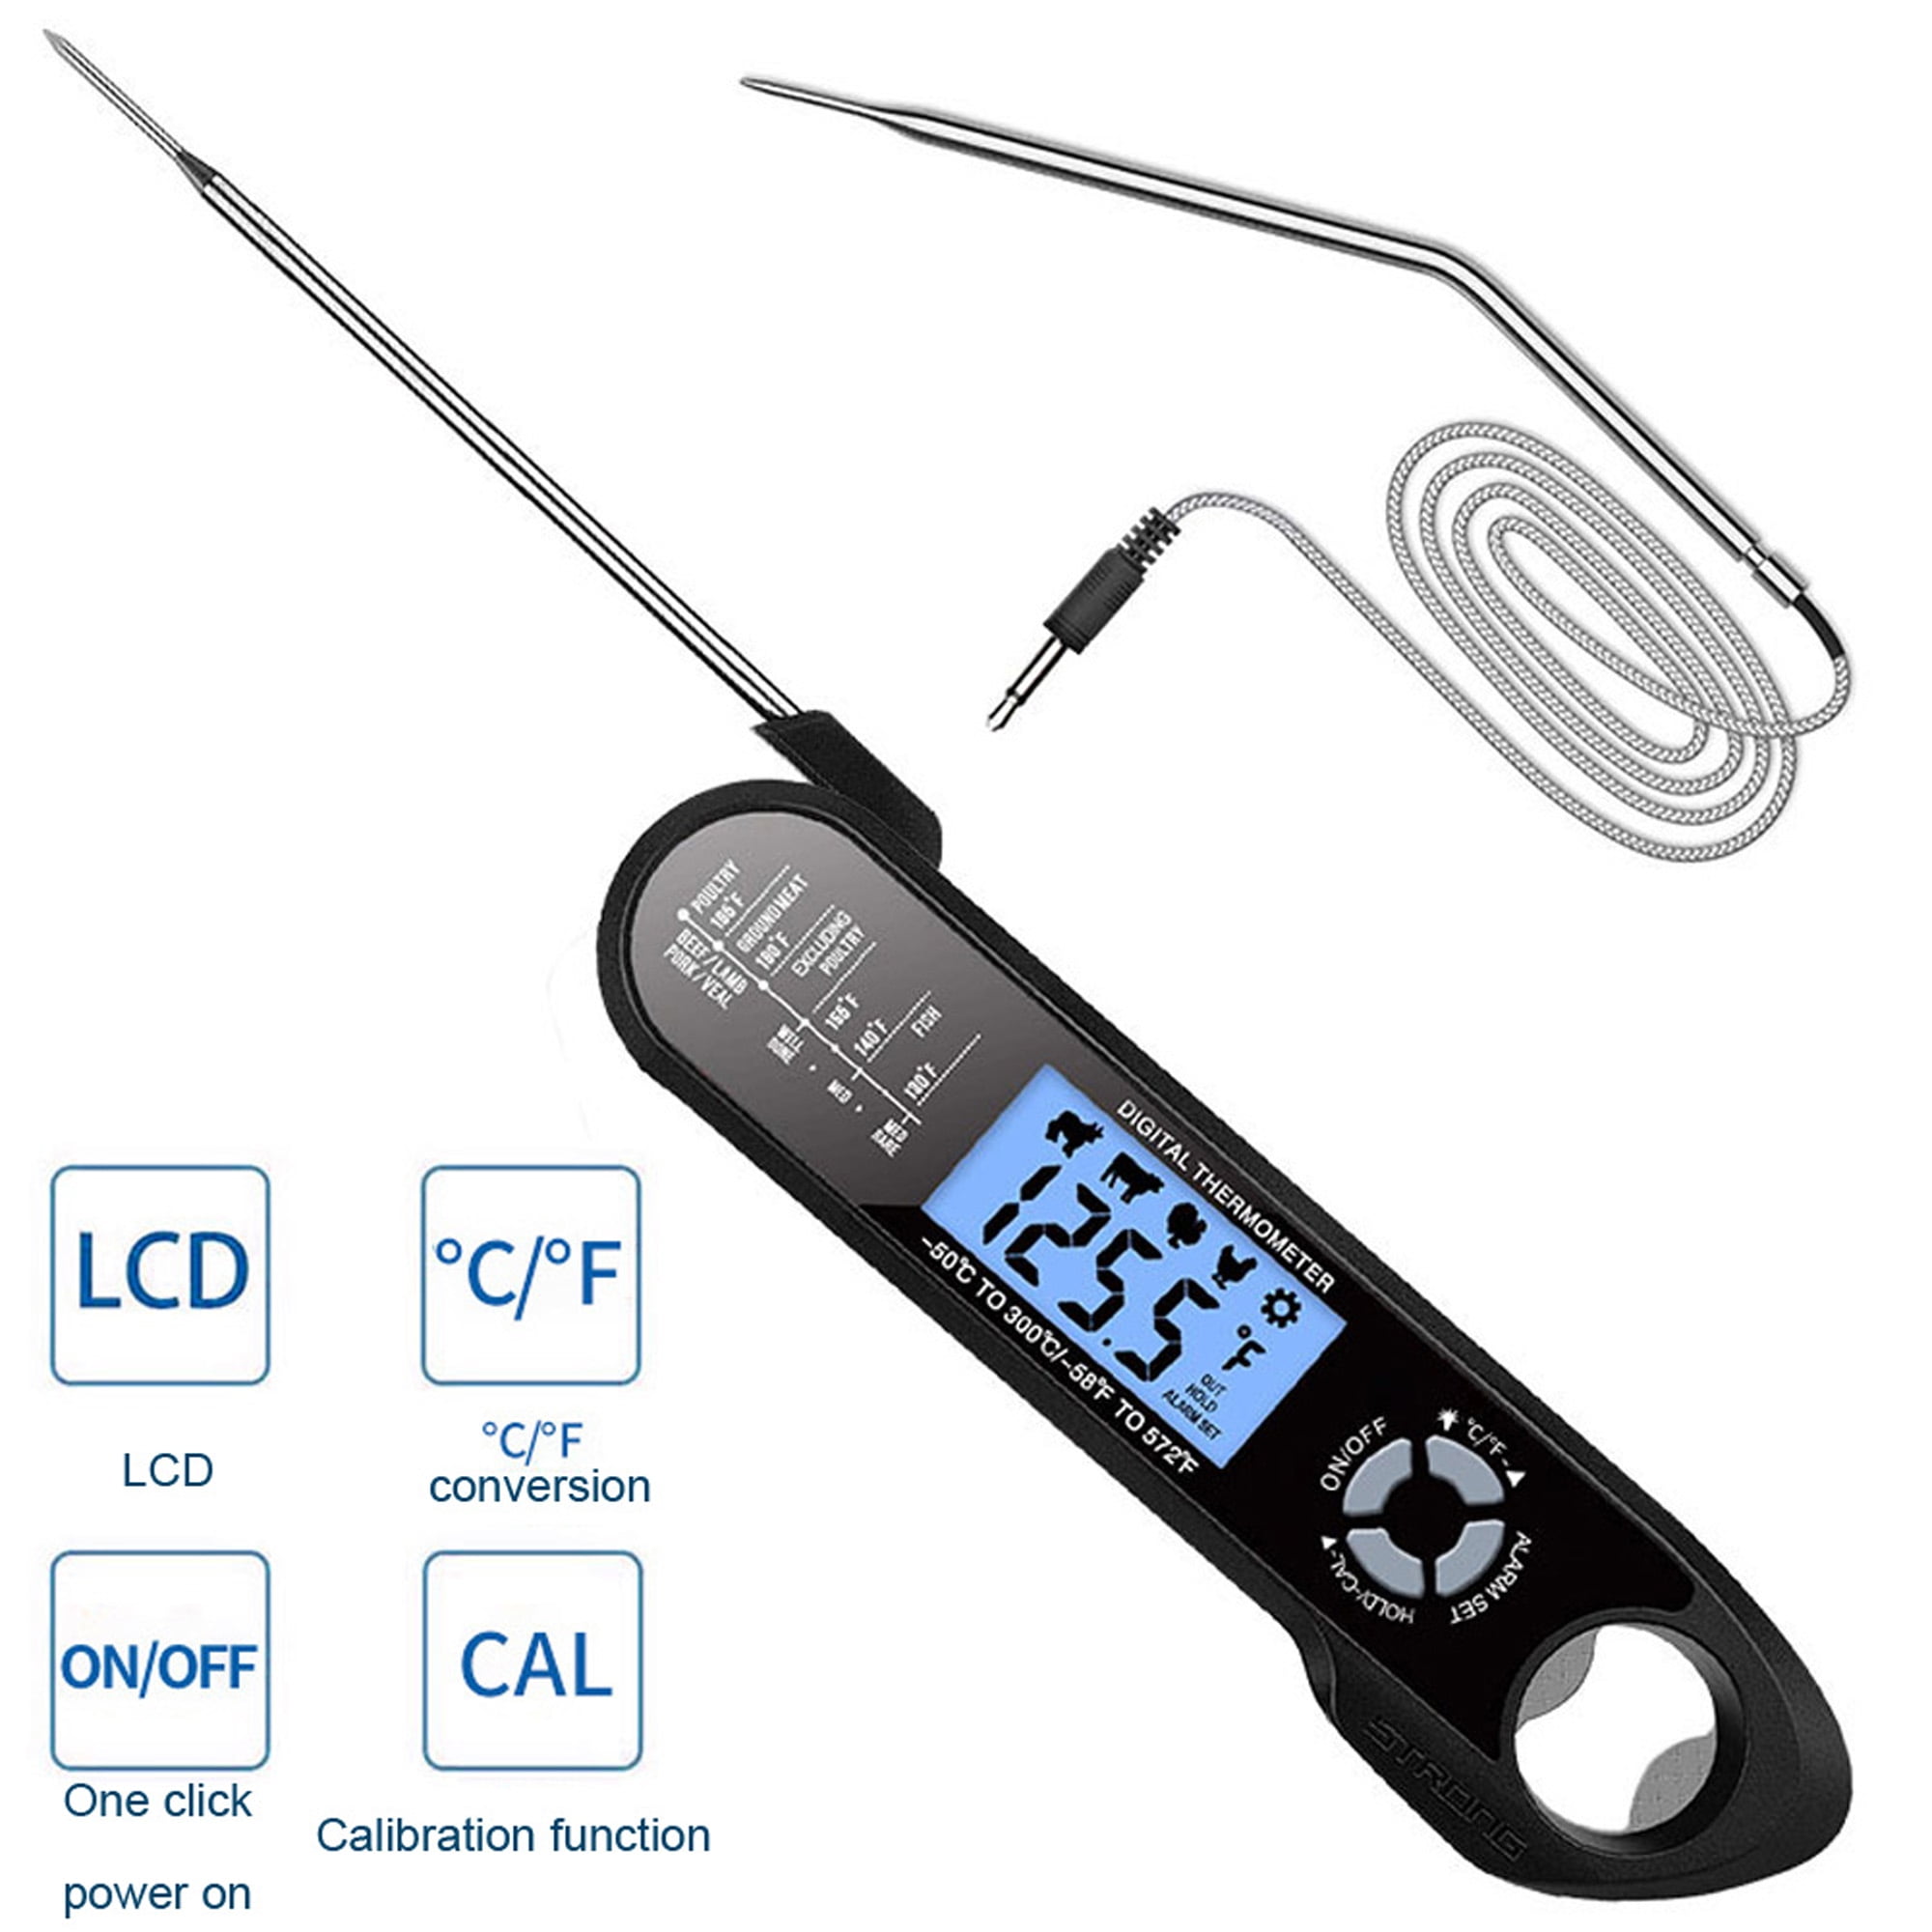 BLACK BBQ Temp LCD Display/Voice Reading Function/℃ and ℉ Convertible/Backlight/G-Sensor Screen Rotation/FDA Approved Probe for Kitchen and Outdoor Cooking iHomey Instant Read Meat Thermometer 